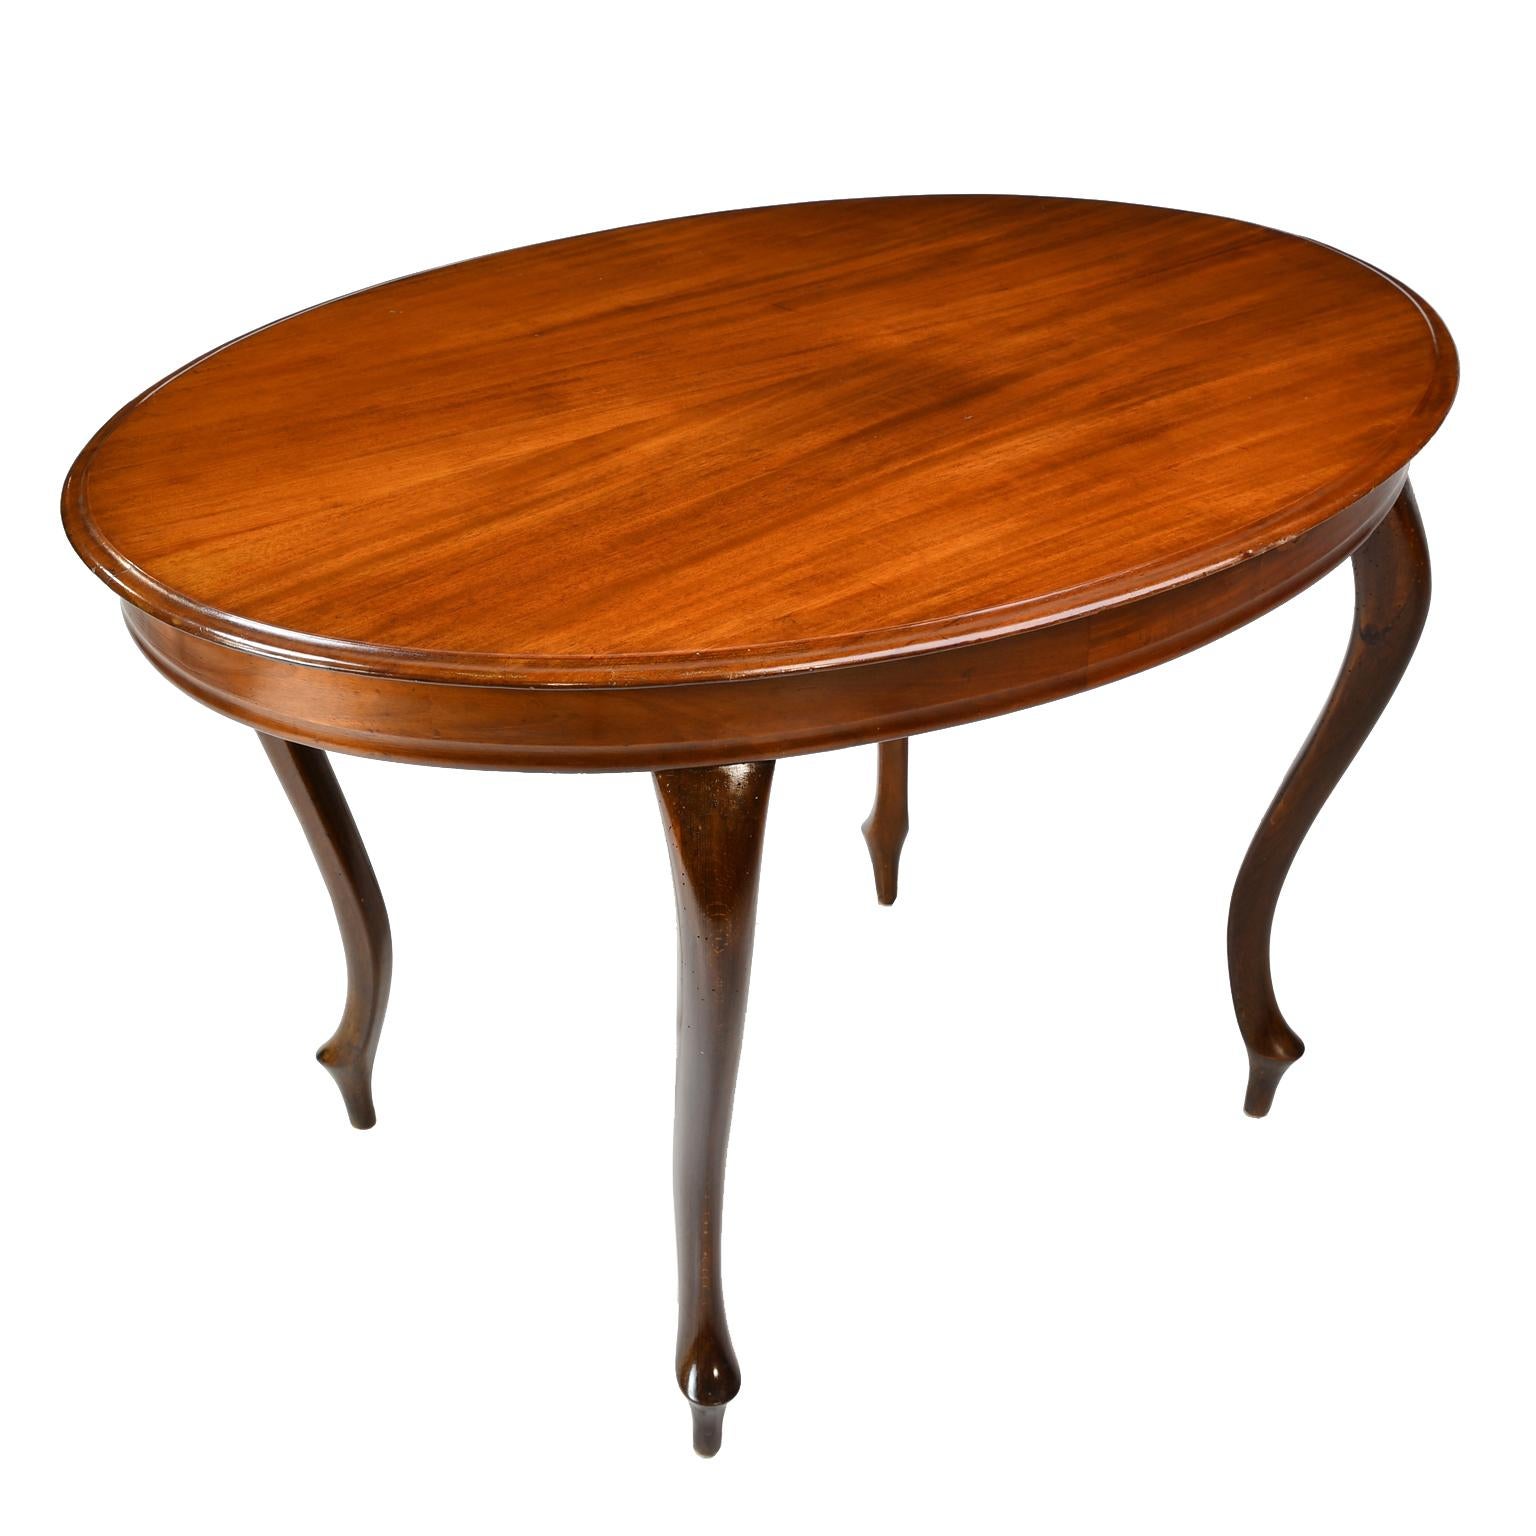 Antique Louis Philippe Style Mahogany Oval Dining/ Center Table, Denmark, c 1860 In Good Condition For Sale In Miami, FL